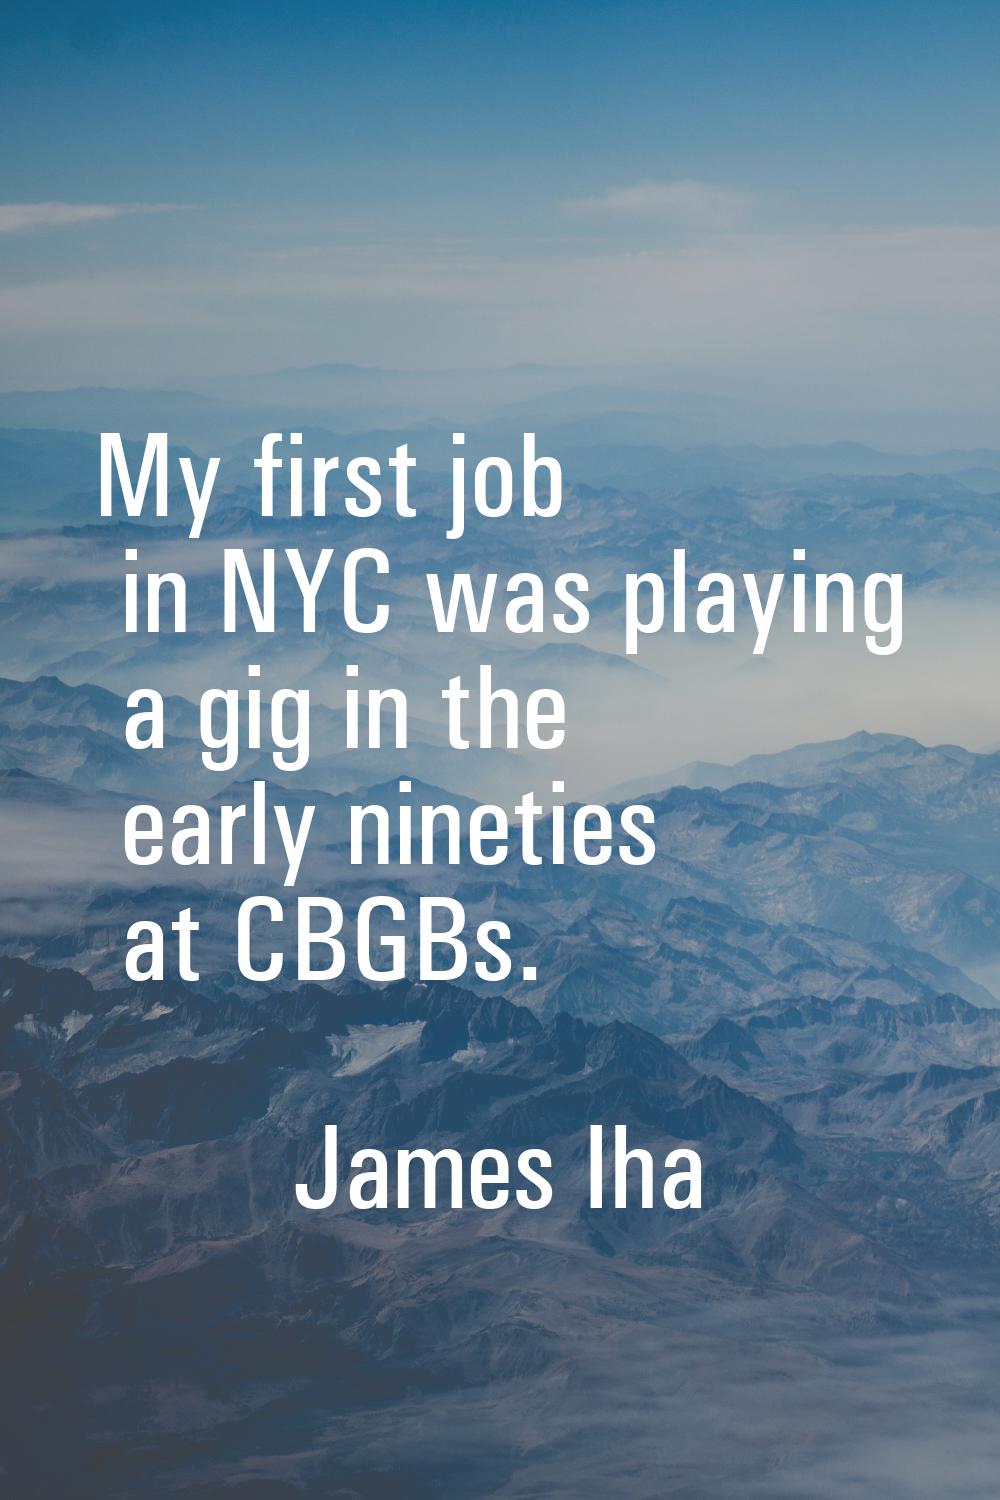 My first job in NYC was playing a gig in the early nineties at CBGBs.